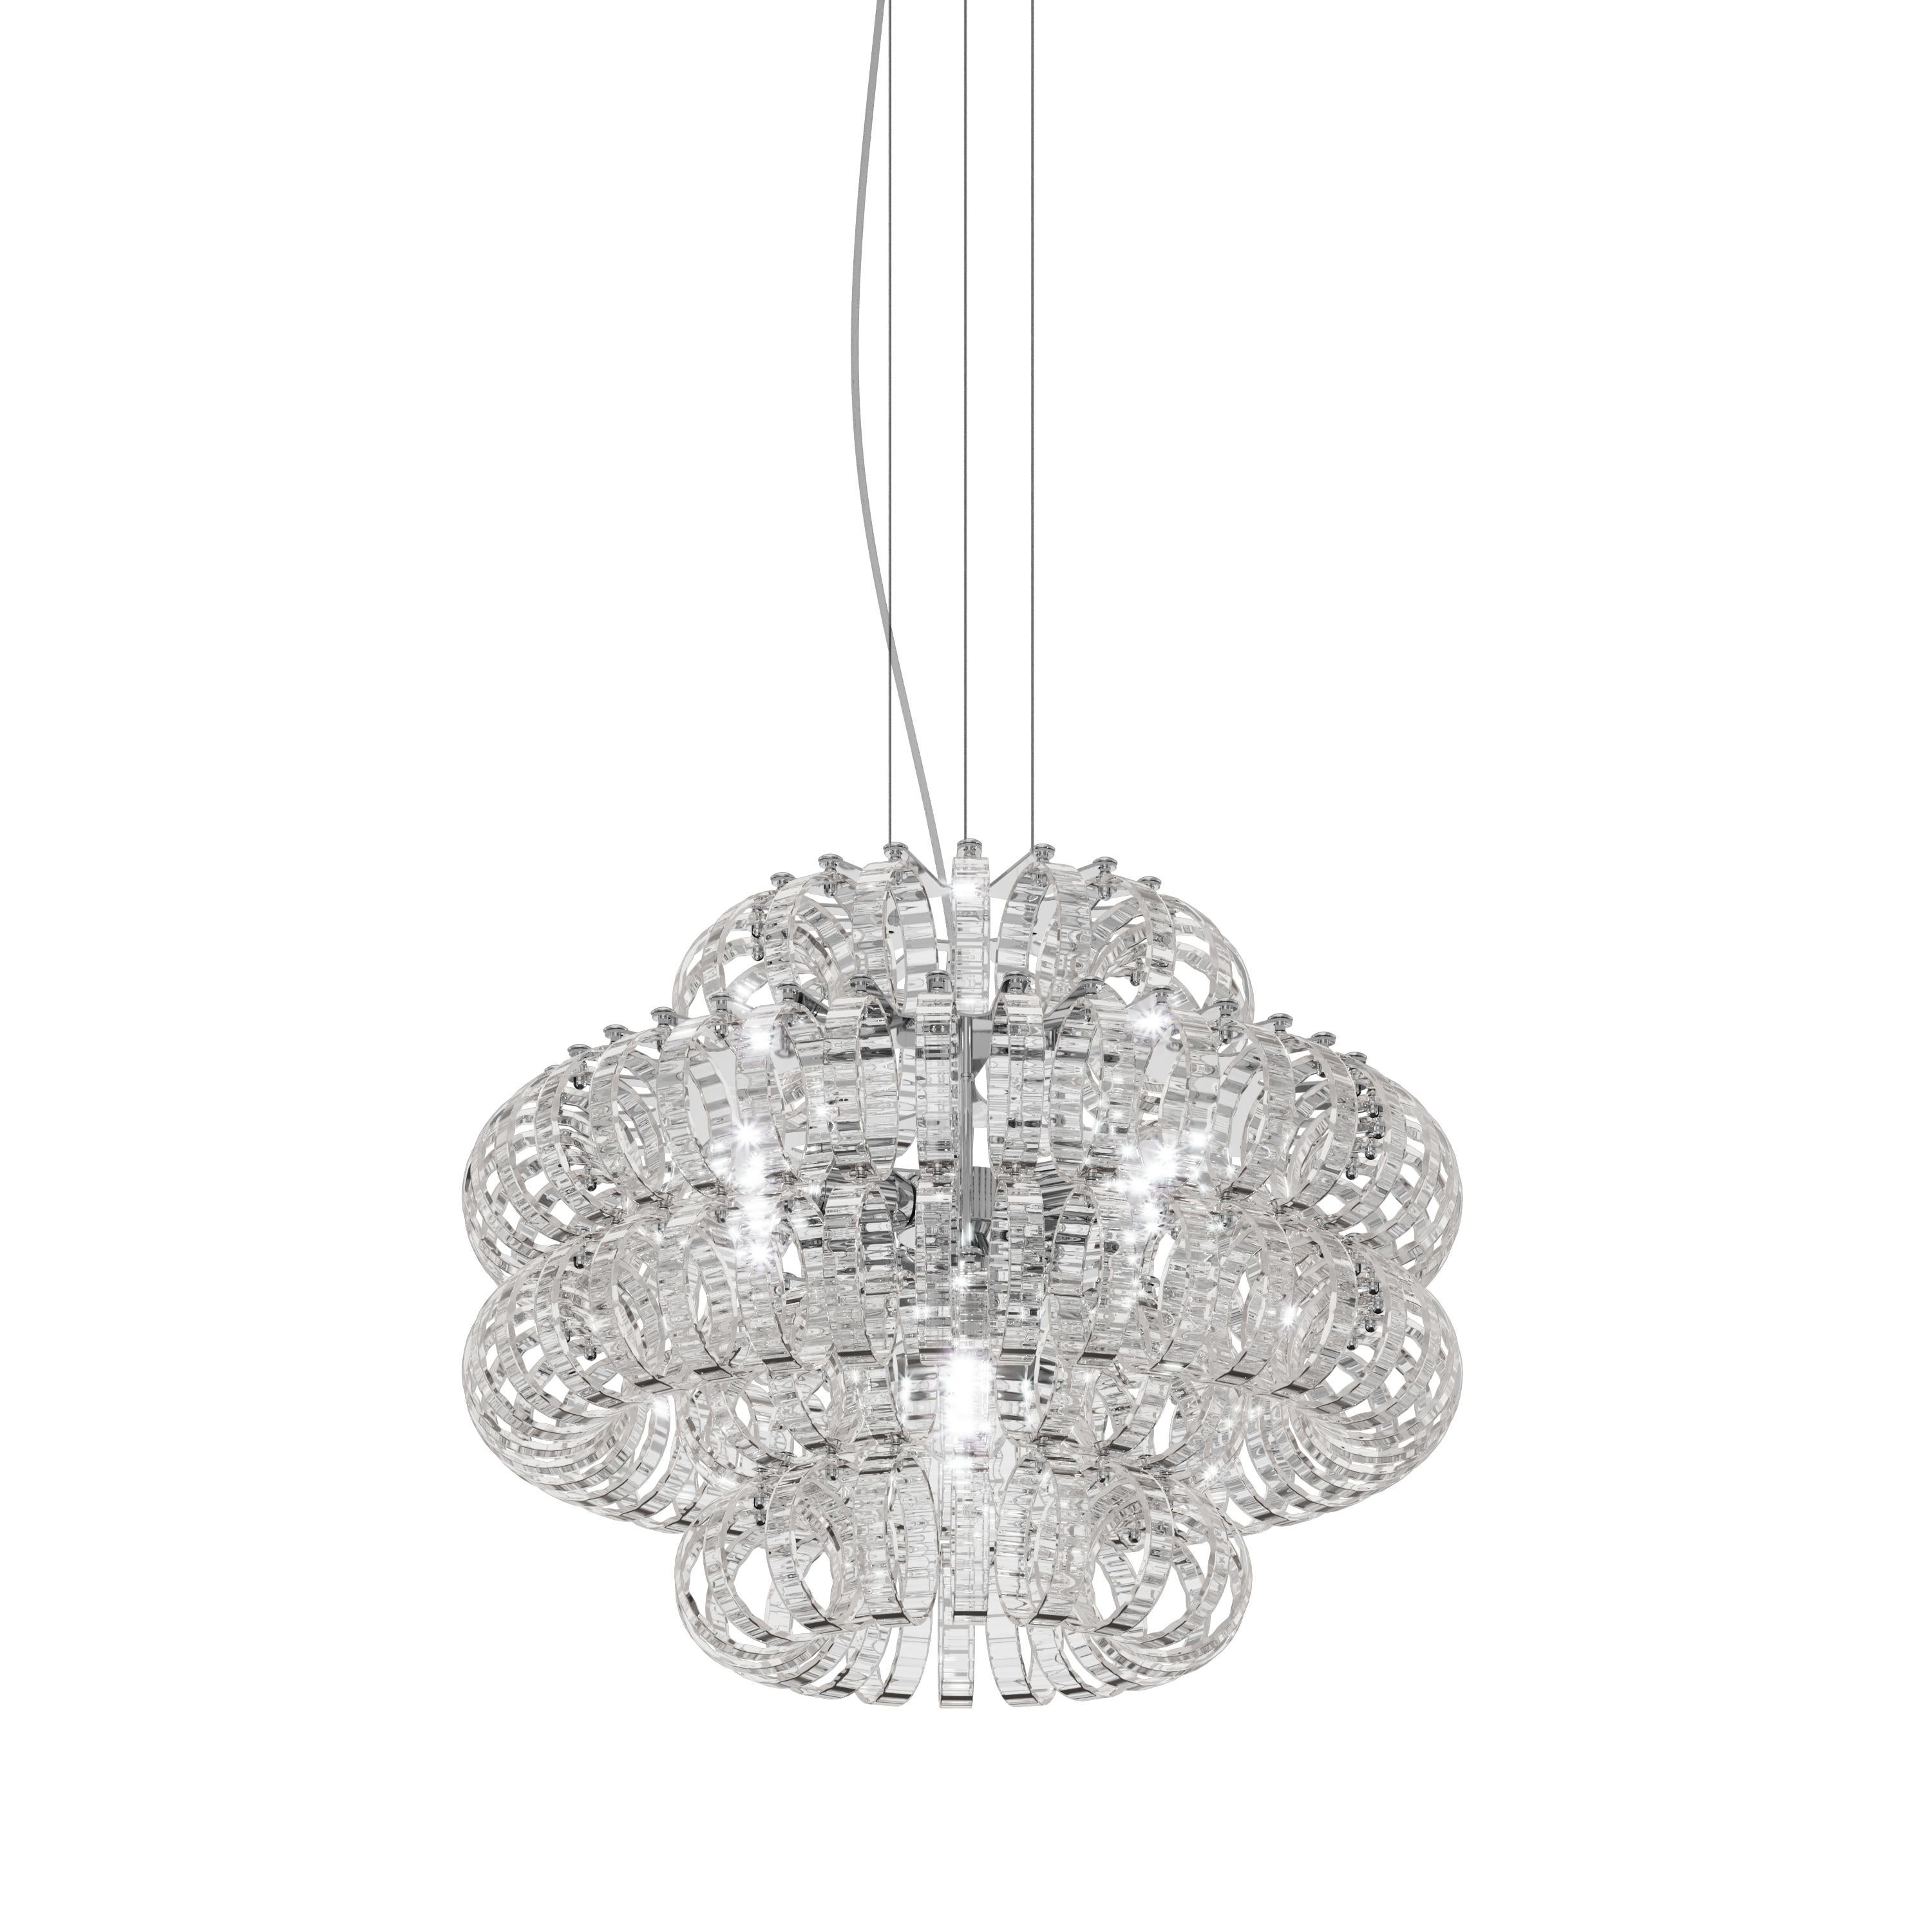 Modern Vistosi Ecos Pendant Light in Crystal Striped Glass And Glossy Chrome Frame For Sale